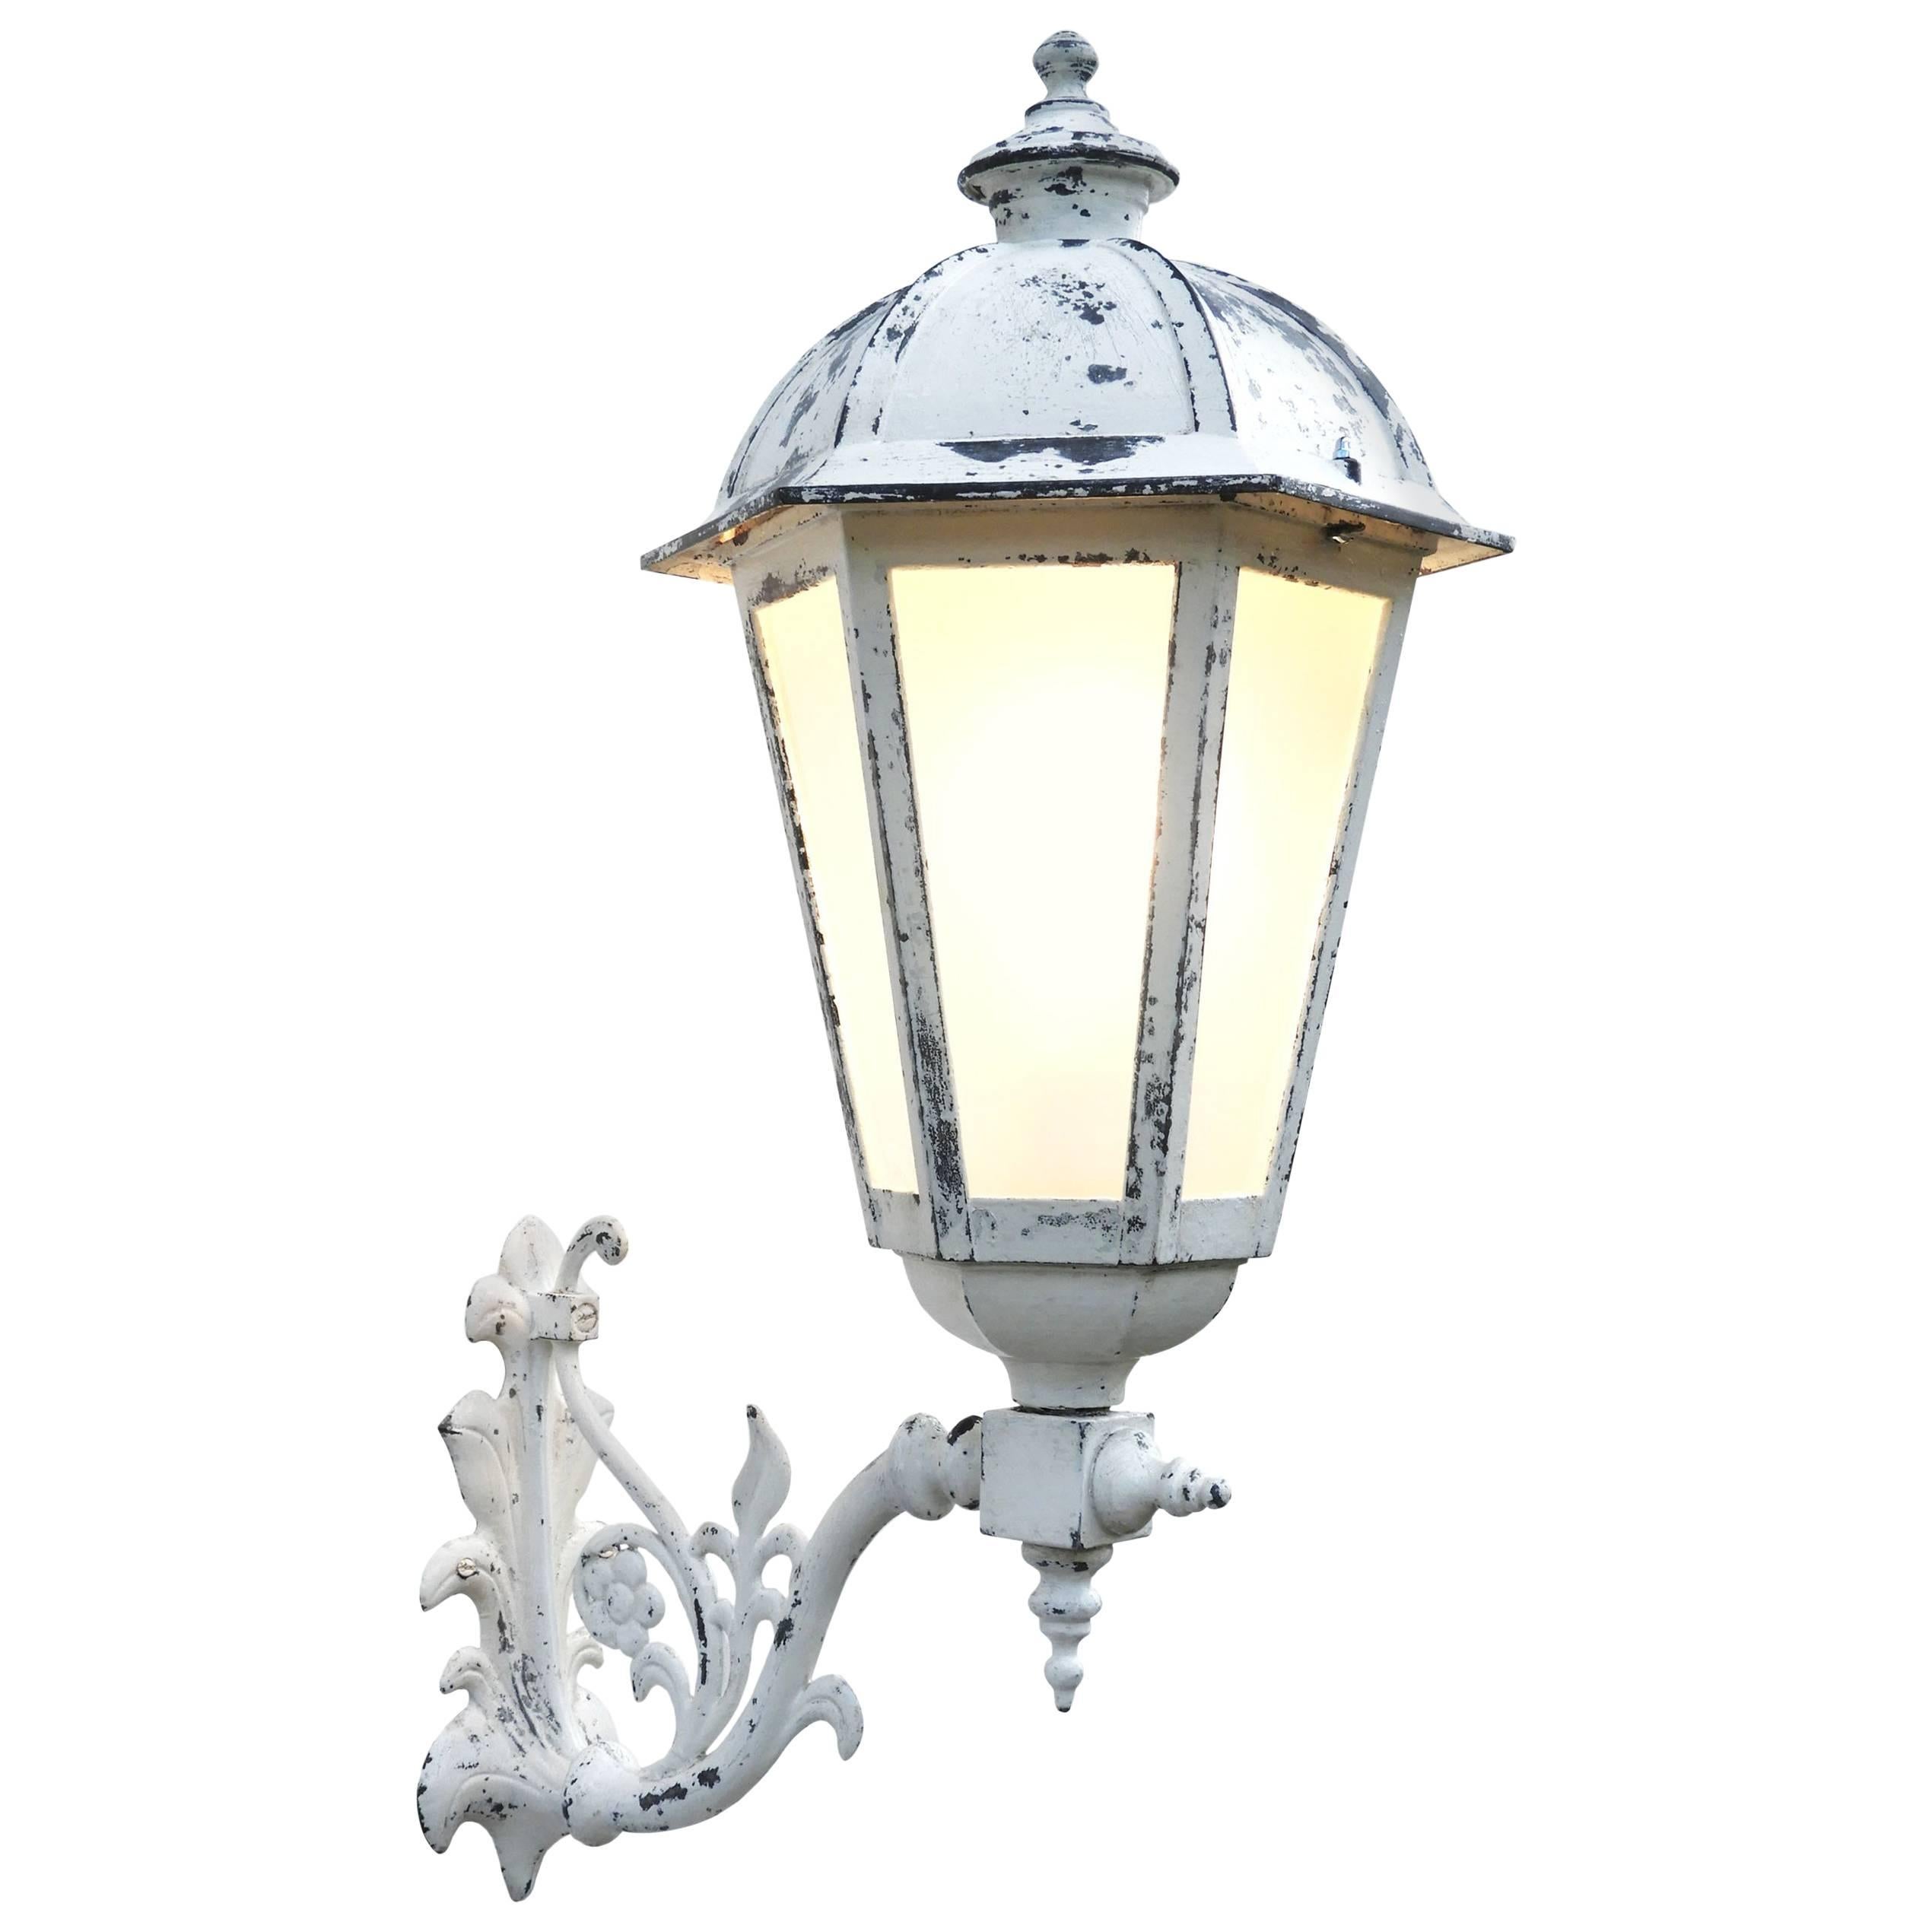 Details about   French Country Metal Lantern Frosted Glass Outdoor Wall Light Sconce Black/Brass 